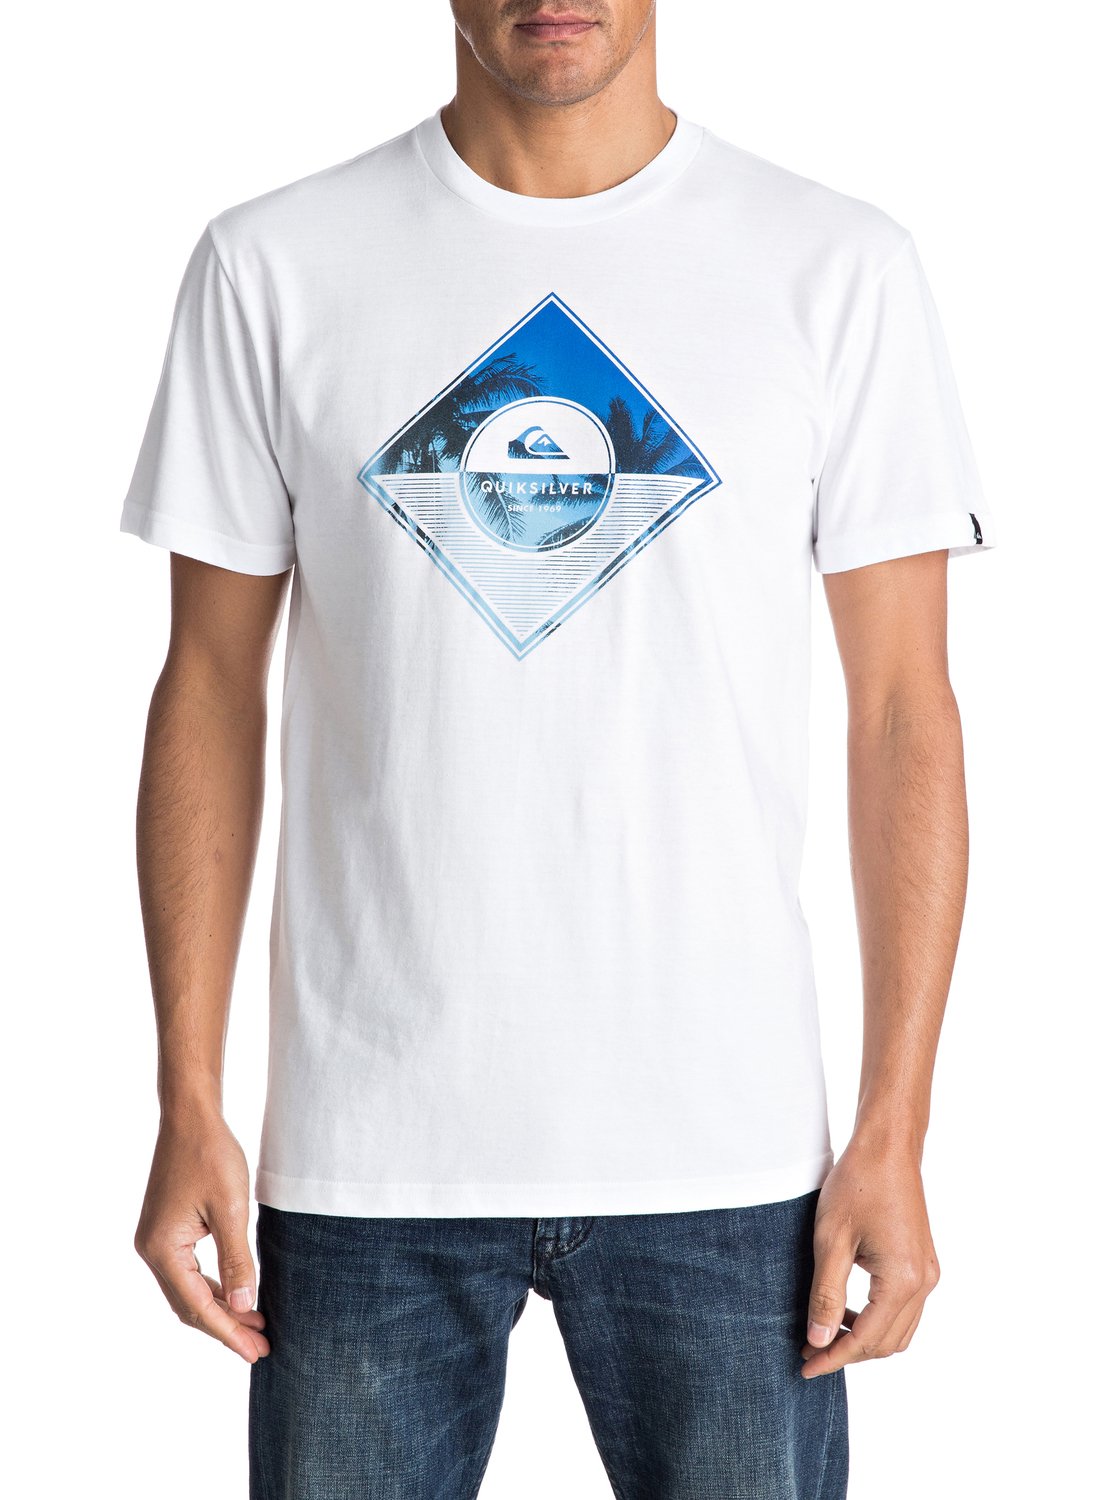 Intoxicated Tee AQYZT04551 | Quiksilver